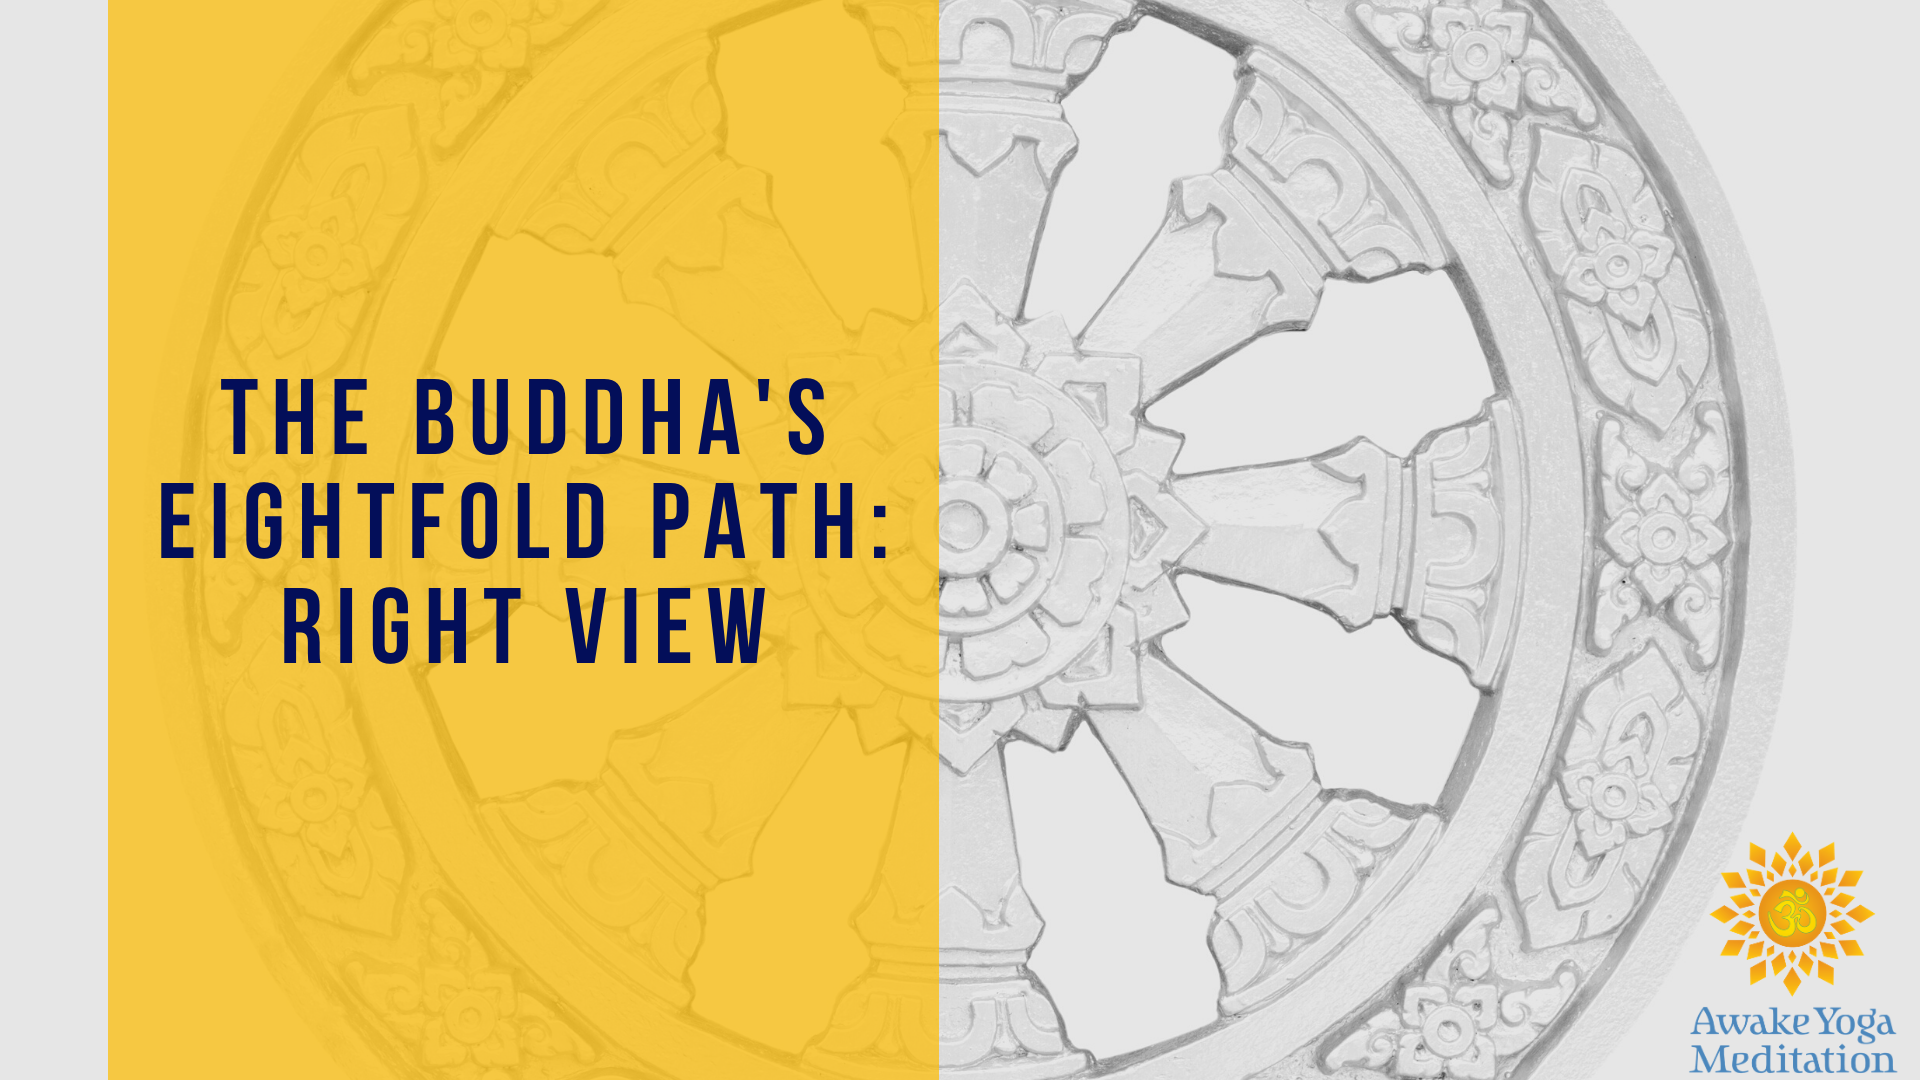 The Buddha's Eightfold Path: Right View